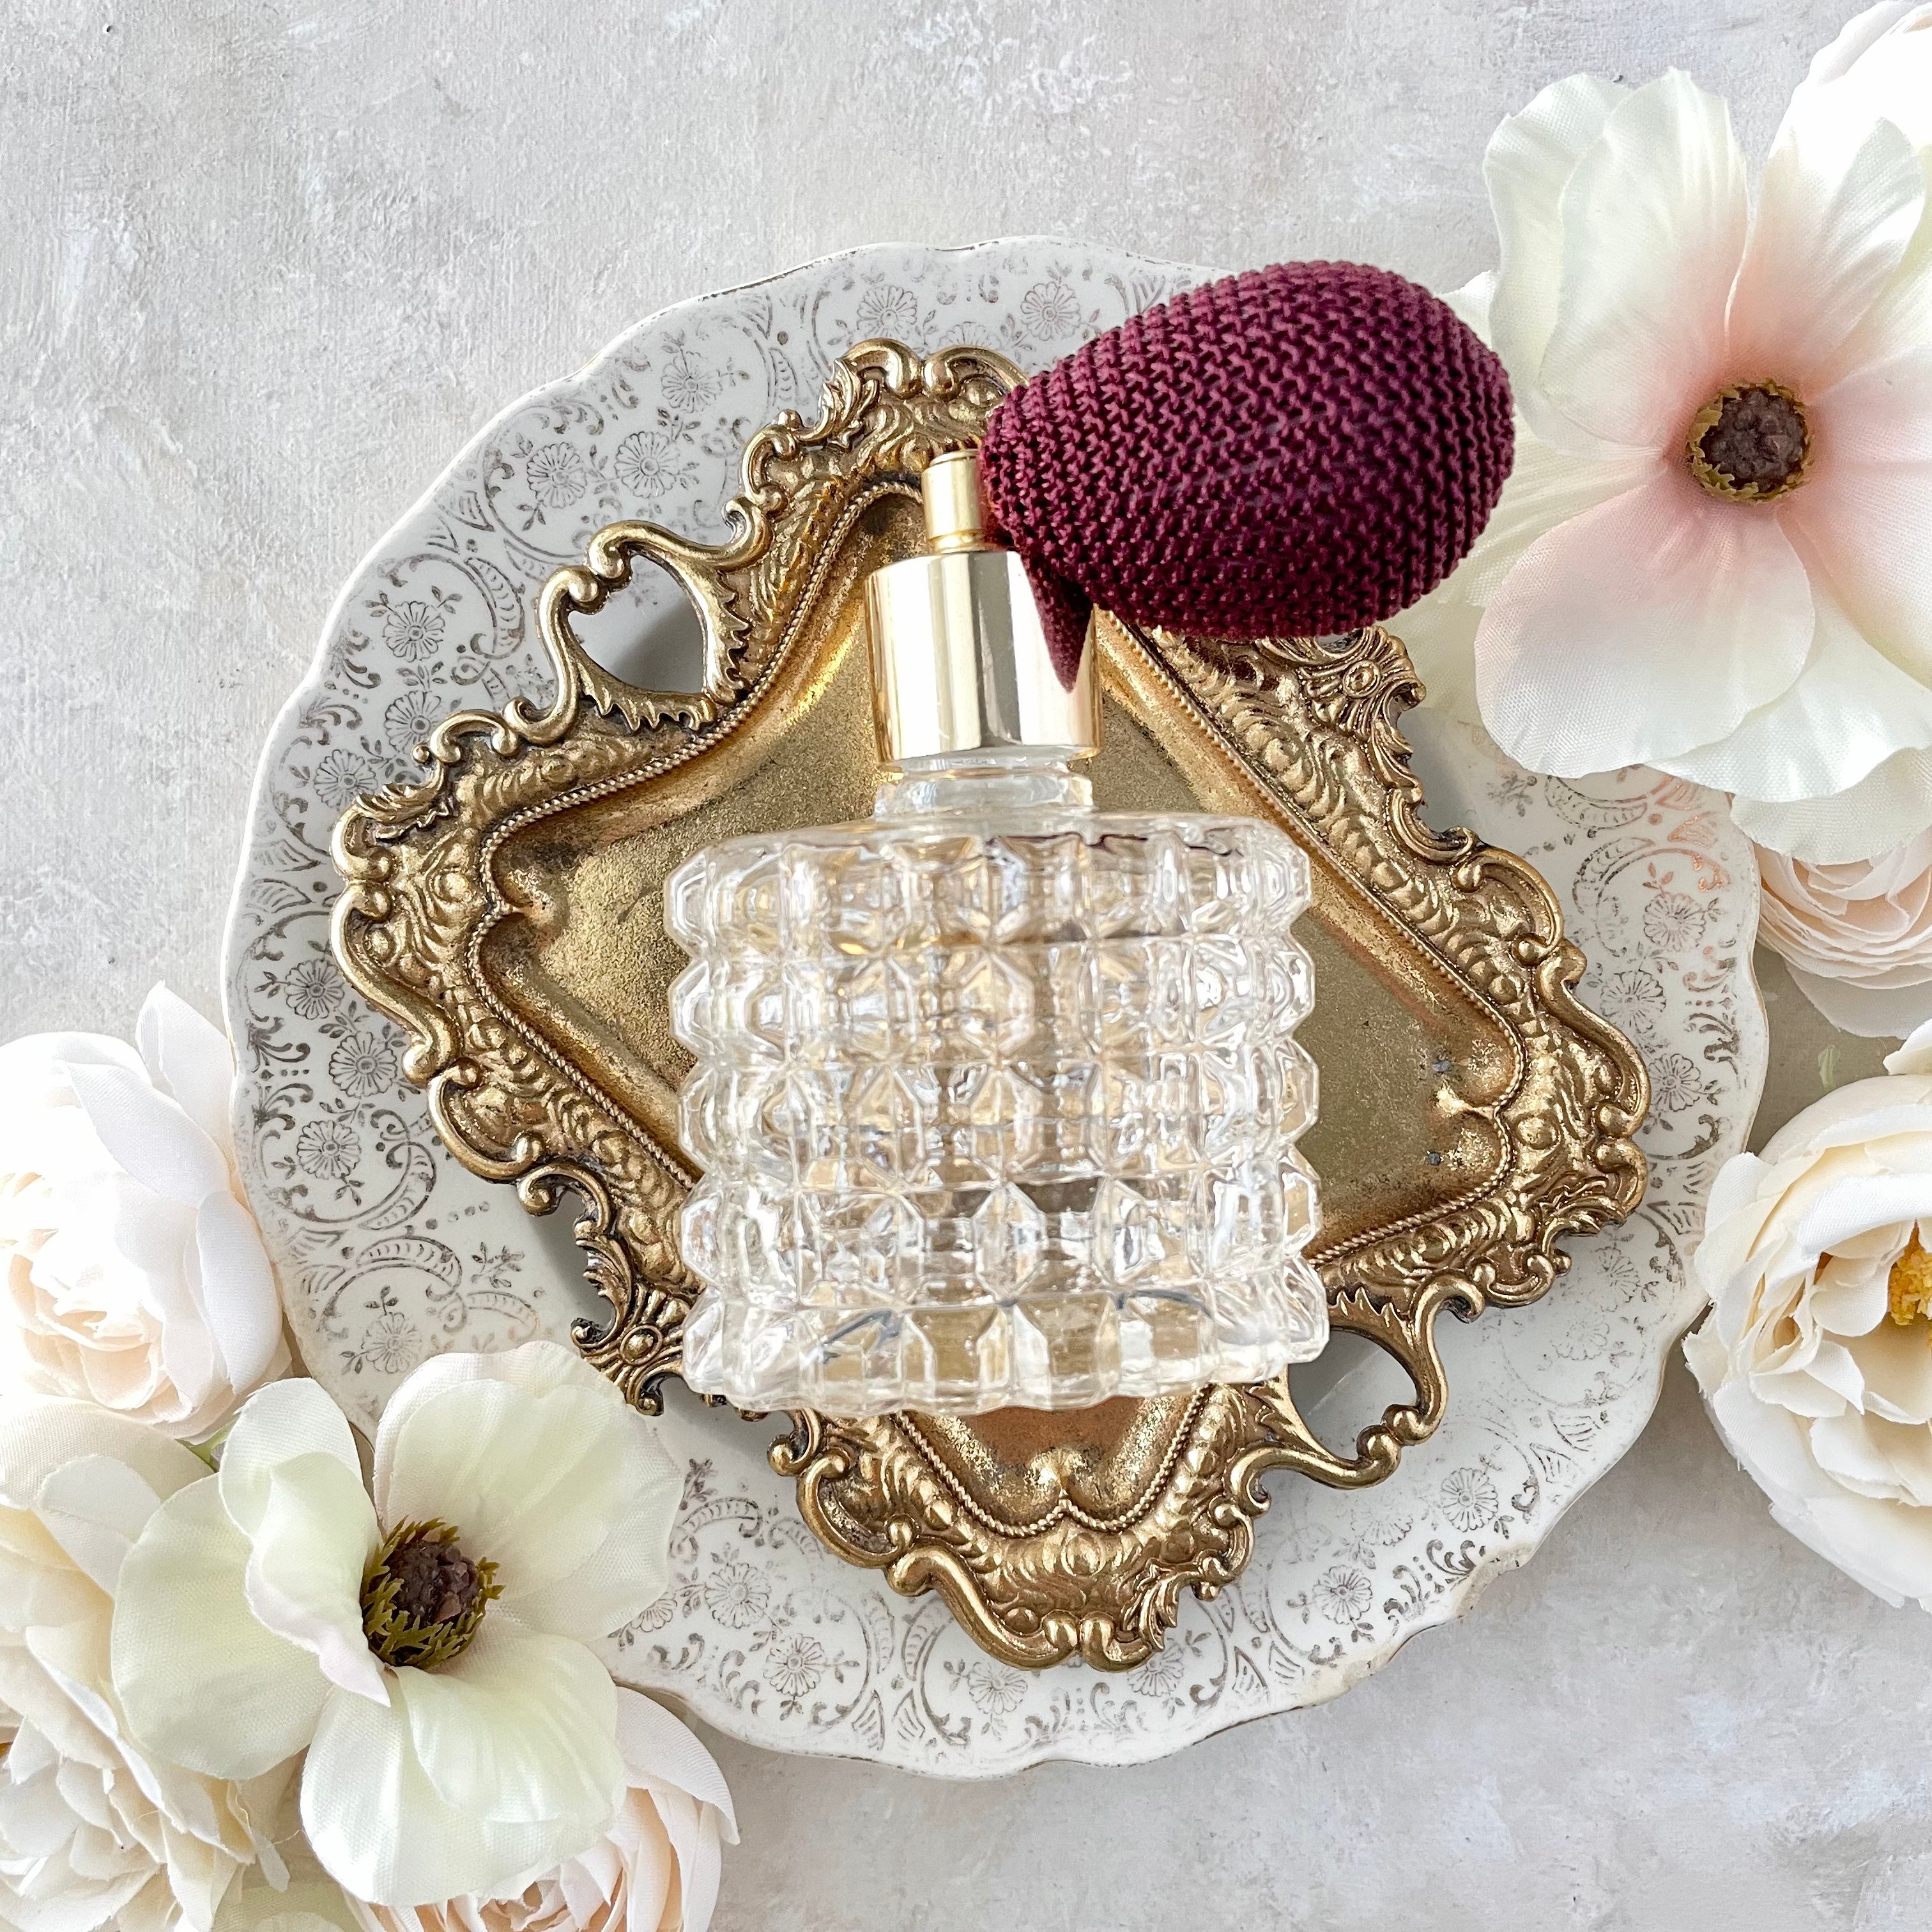 Gold vintage tray with vintage perfume bottle on top surrounded by white florals - Flat Lay Props from Champagne & GRIT